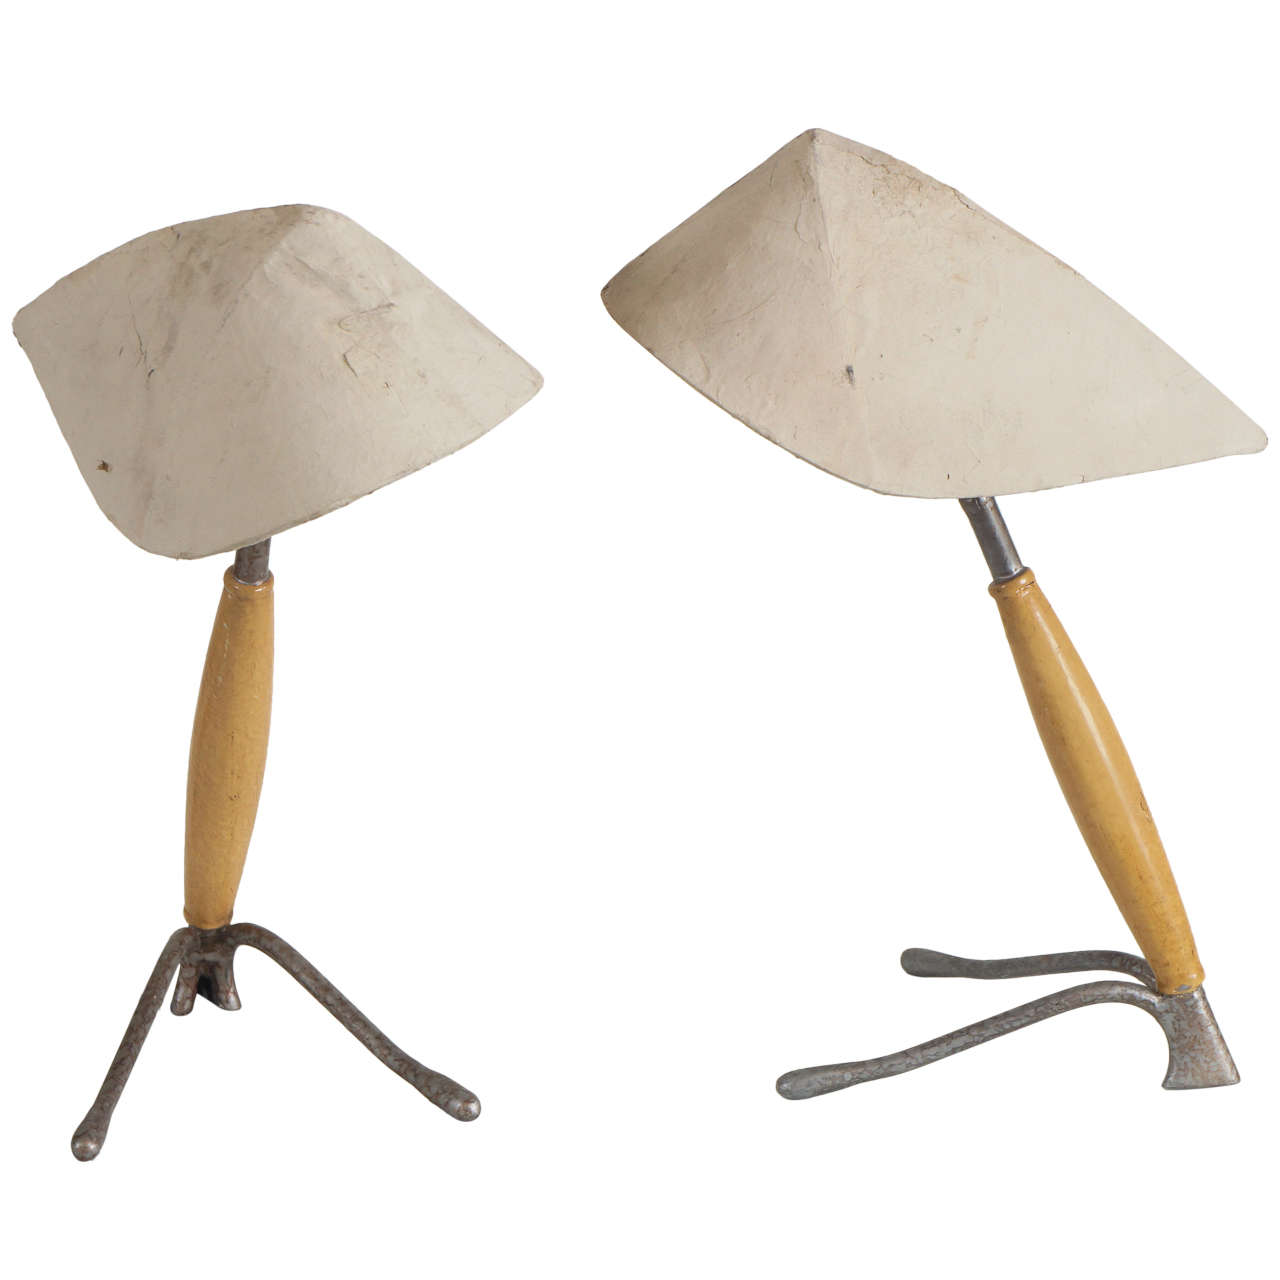 A Pair of Lamps with Papier Mache Shades